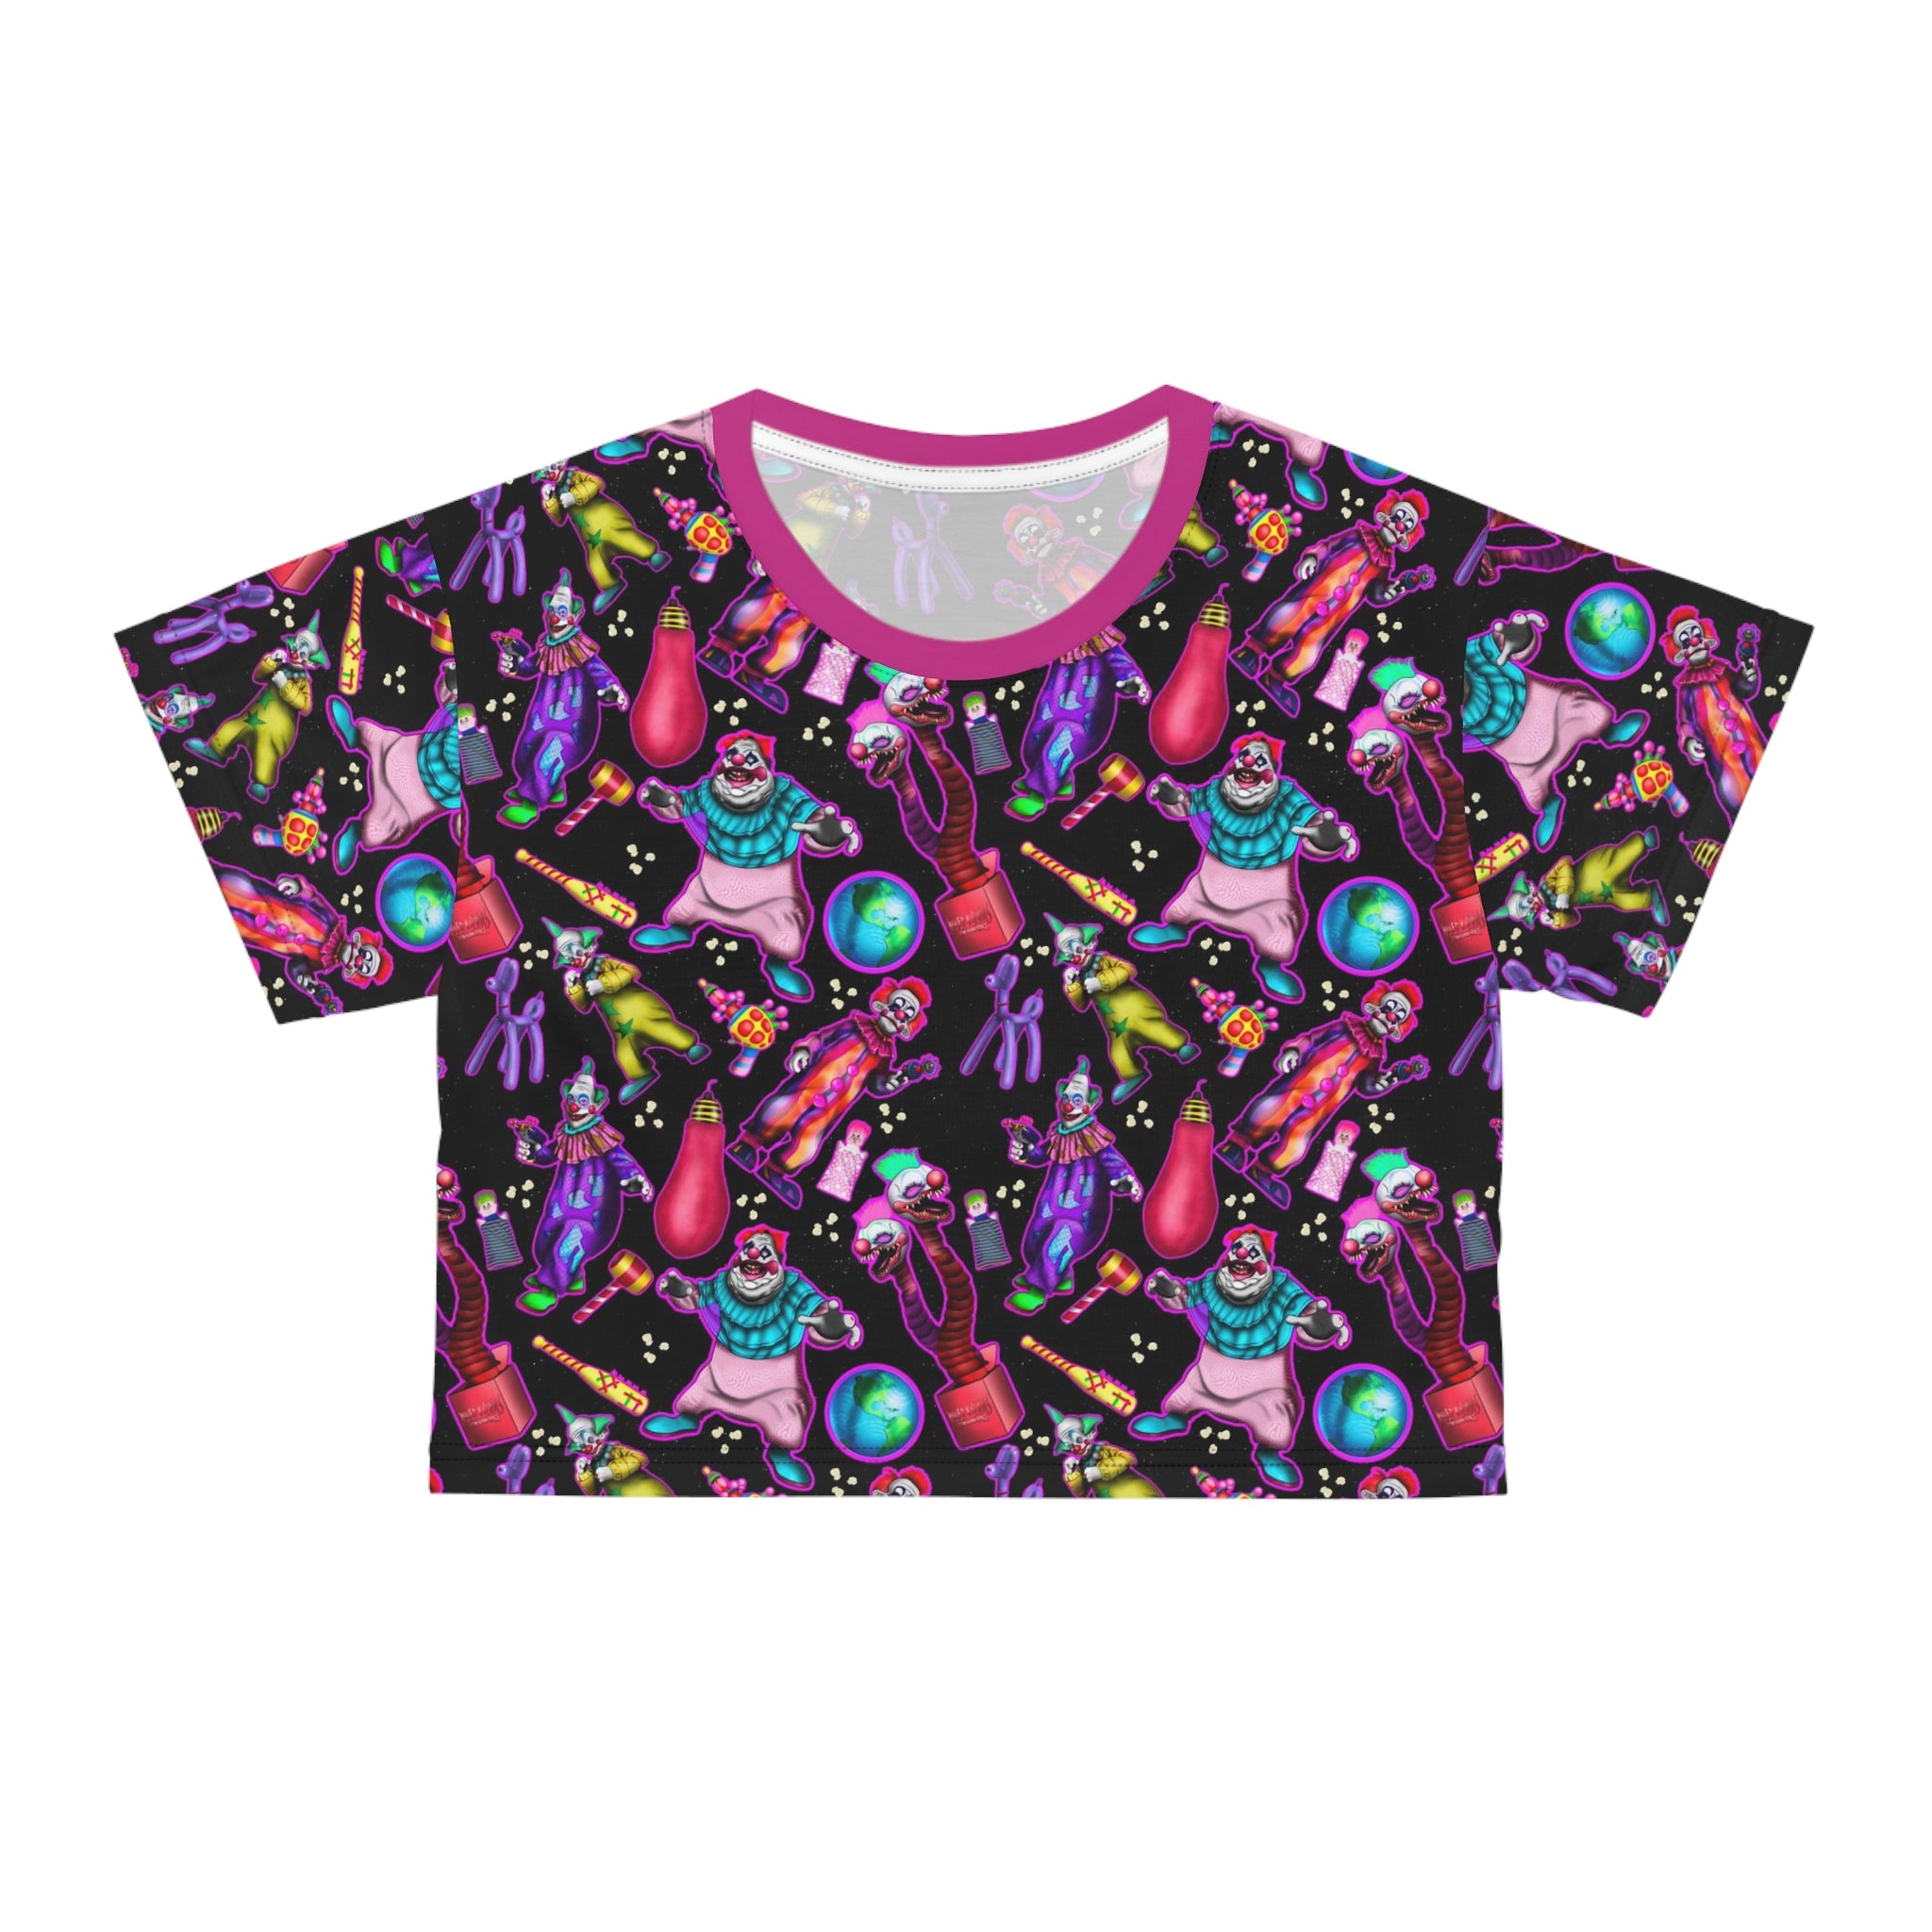 Cotton Candy Killers Crop Top